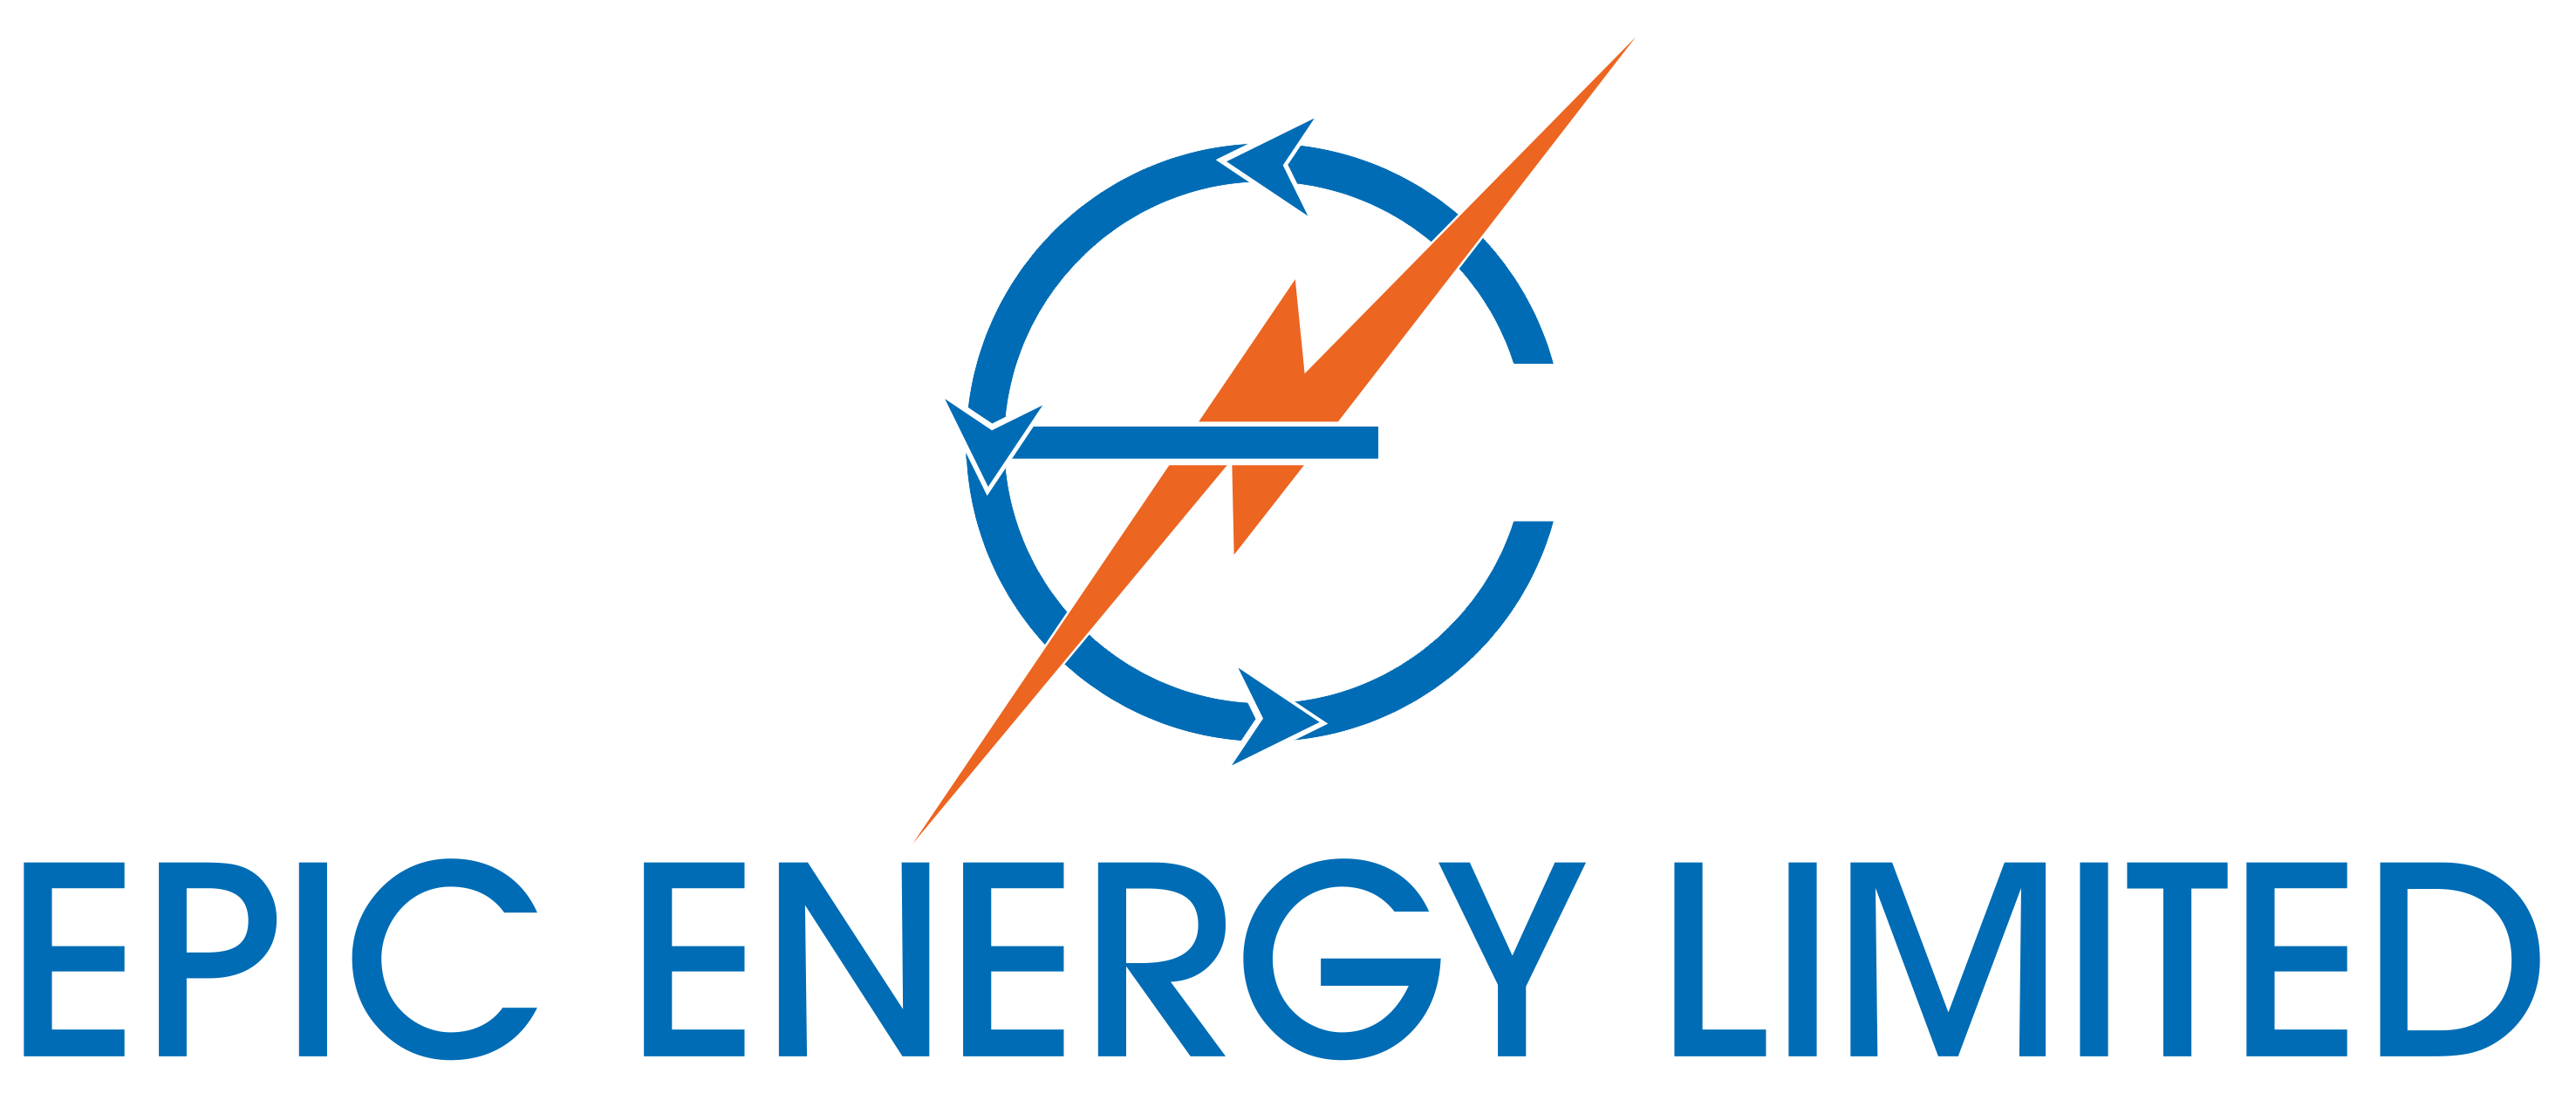 projects-services-epic-energy